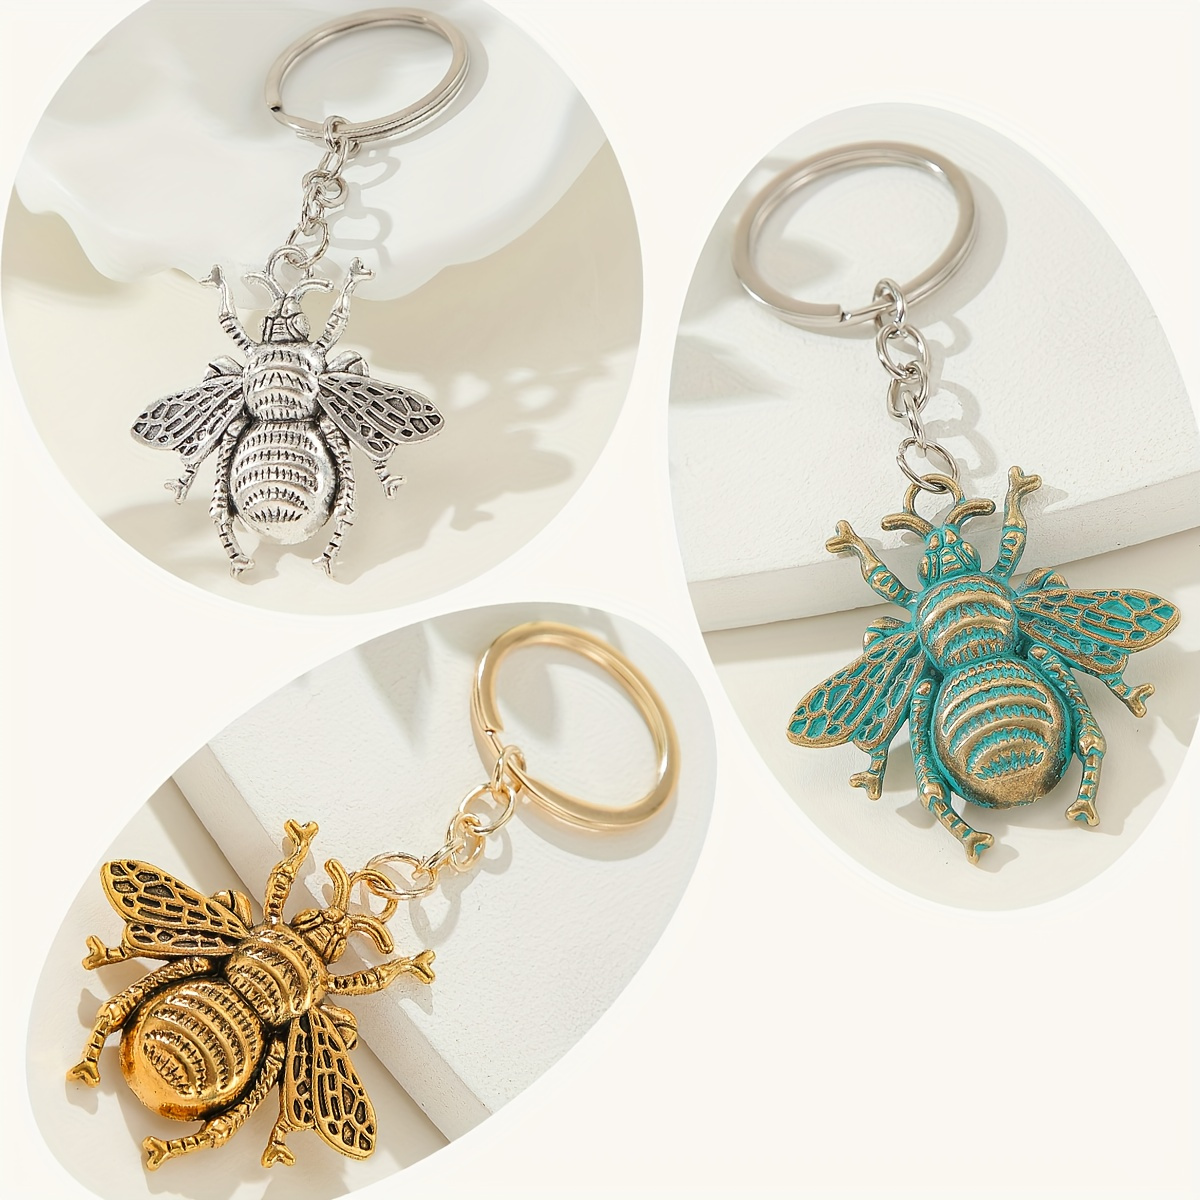 https://img.kwcdn.com/product/trendy-beautiful-electroplated-insect-bee-pendant-keychain/d69d2f15w98k18-d3243fdf/Material/ImageCut/a29df7cb-1135-4cec-98b0-48b4c782879d.jpg